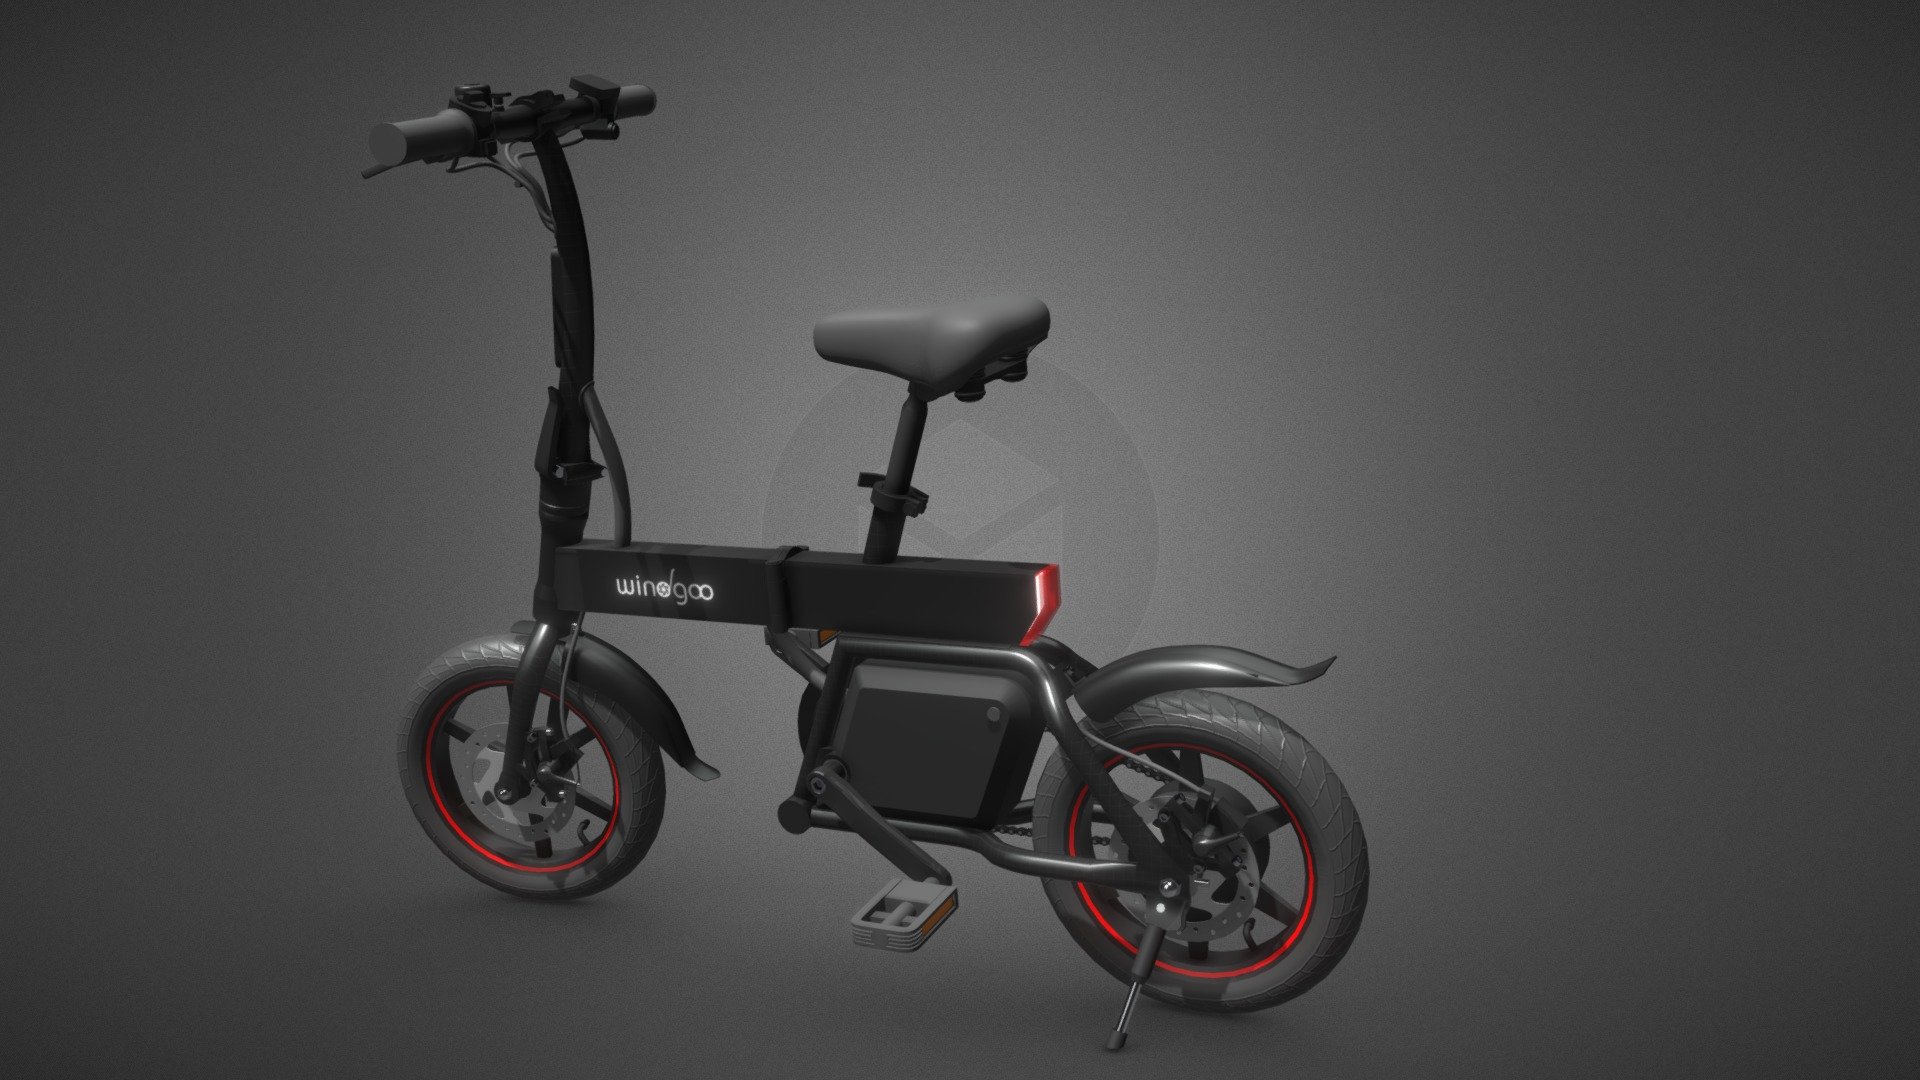 Windgoo / Moovway B20 foldable e-bike.

The model is created in metric units.
It makes use of rounded edges.
Textures are in jpg format.
Model is not unwrapped.
Rendered in V-ray
Polygons: 46545(Ngons used)
Vertices: 50937 - Windgoo B20 - 3D model by Patrick Goud (@patrick_goud) 3d model